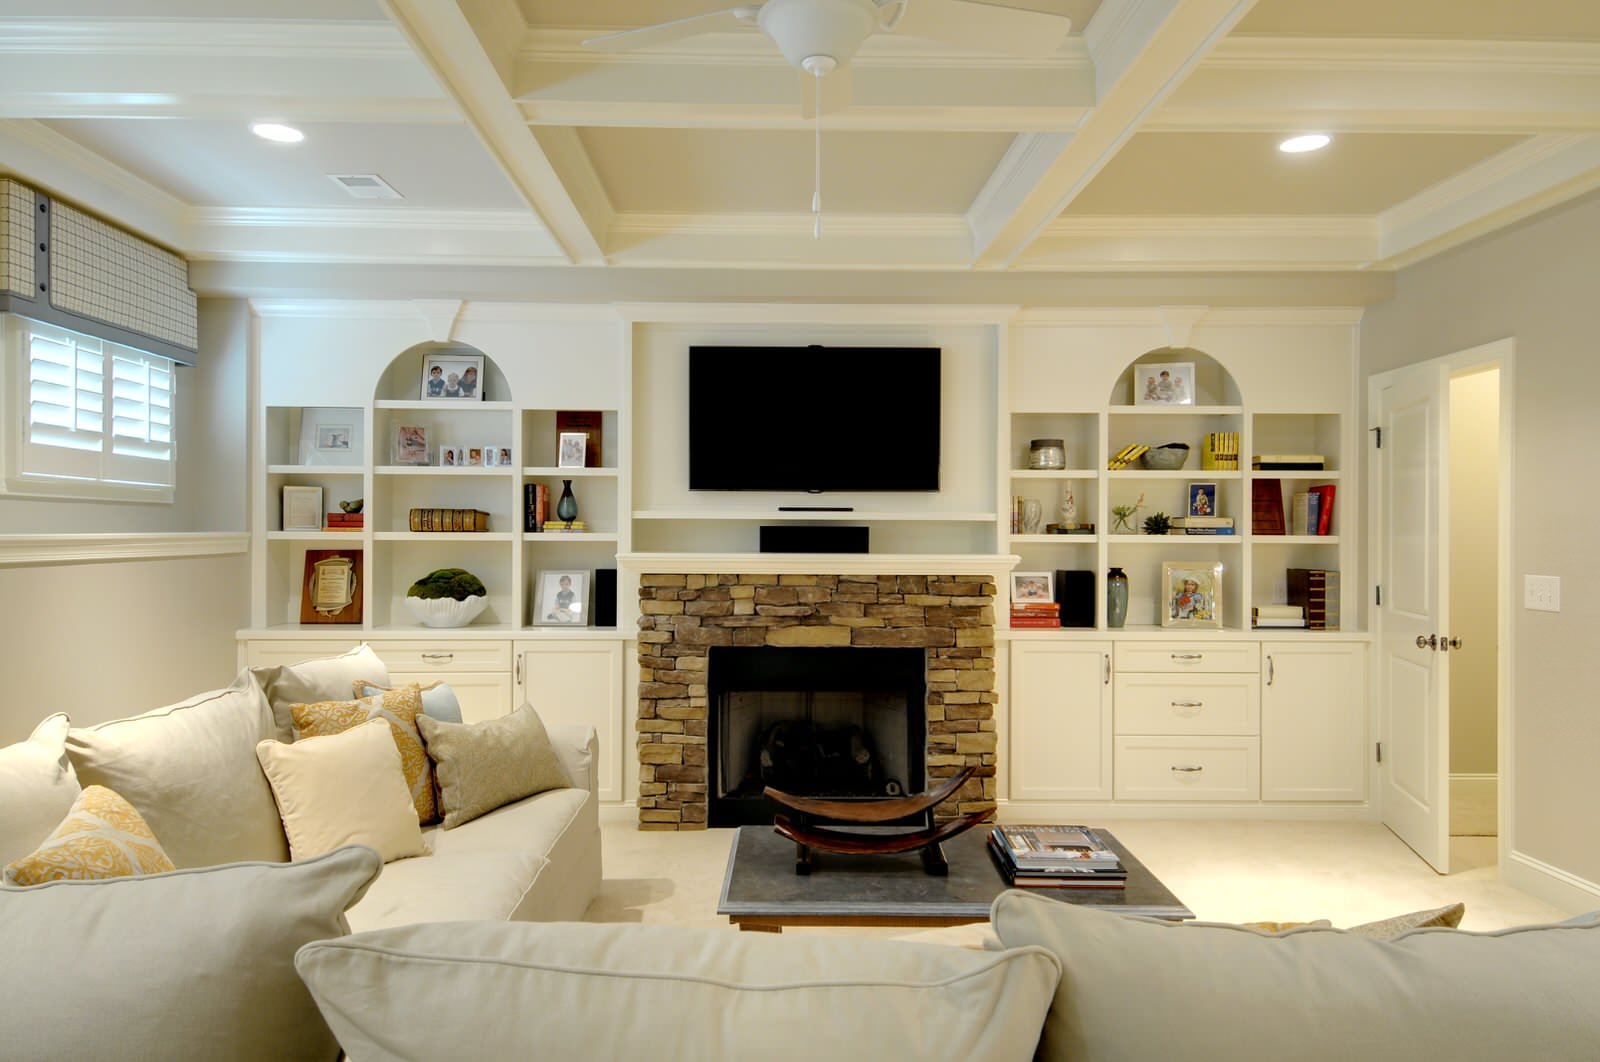 15 Most Elegant Built In Shelves Around, How To Decorate Built In Shelves Next Fireplace